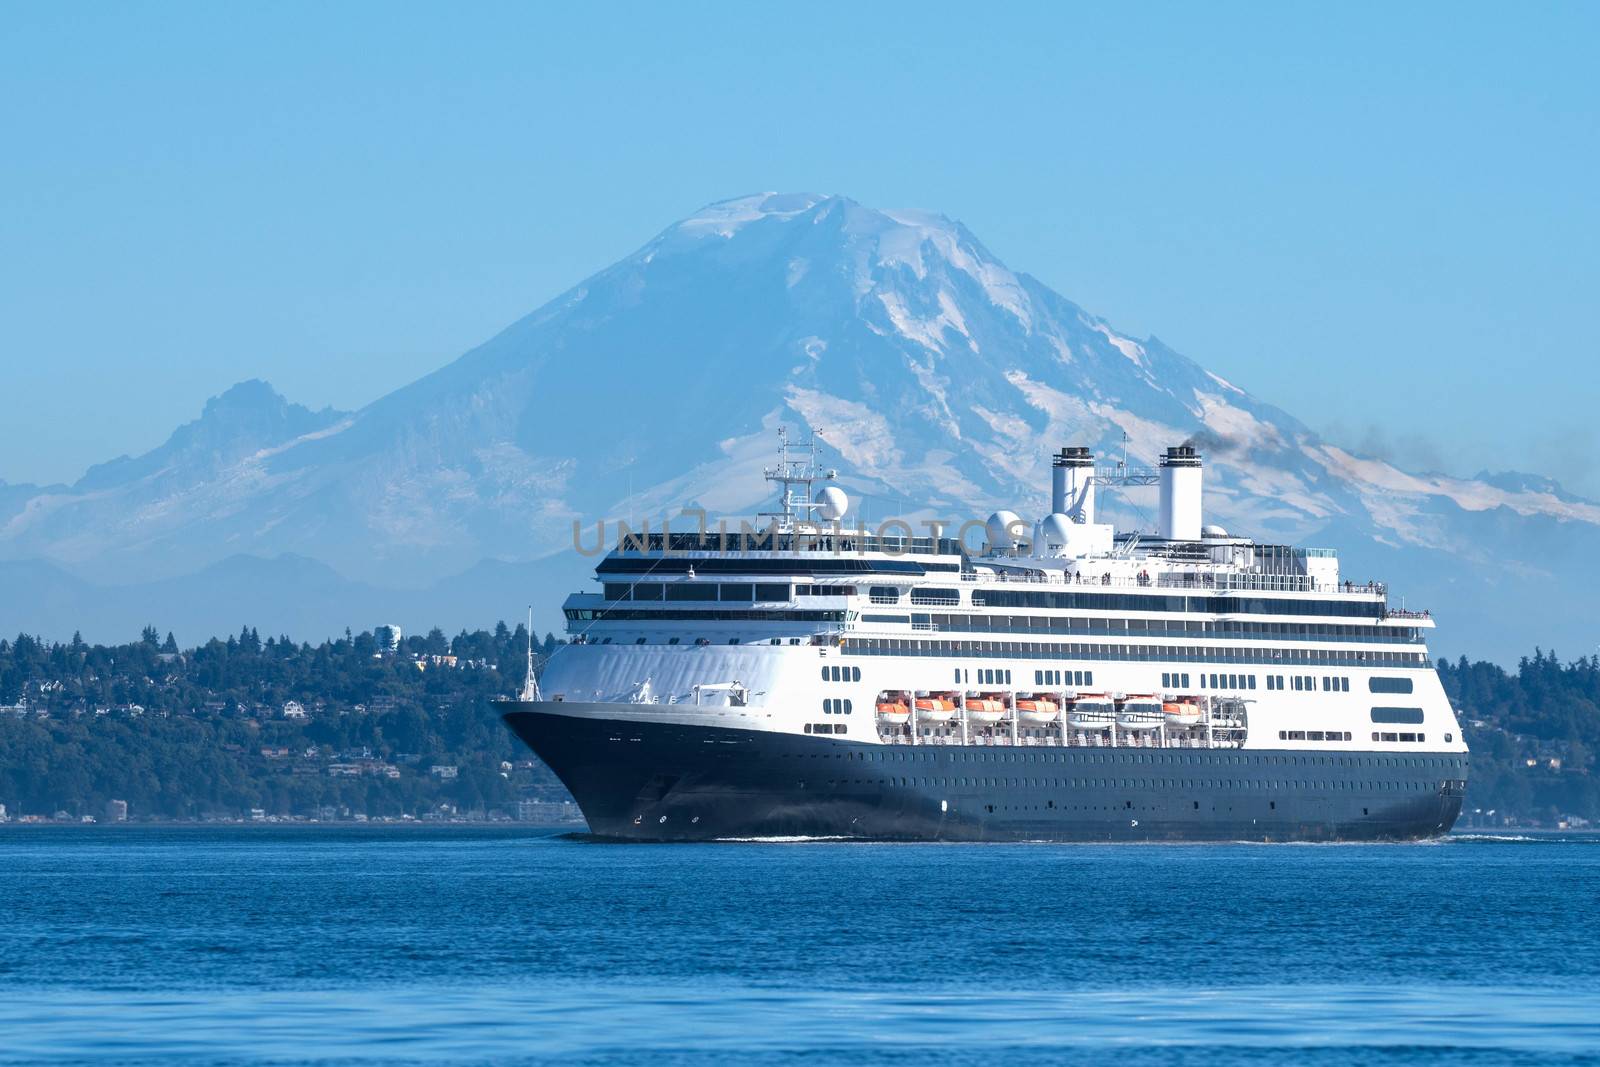 Cruise ship leaving Seattle on her way to Alaska with Mount Rainier in the background.